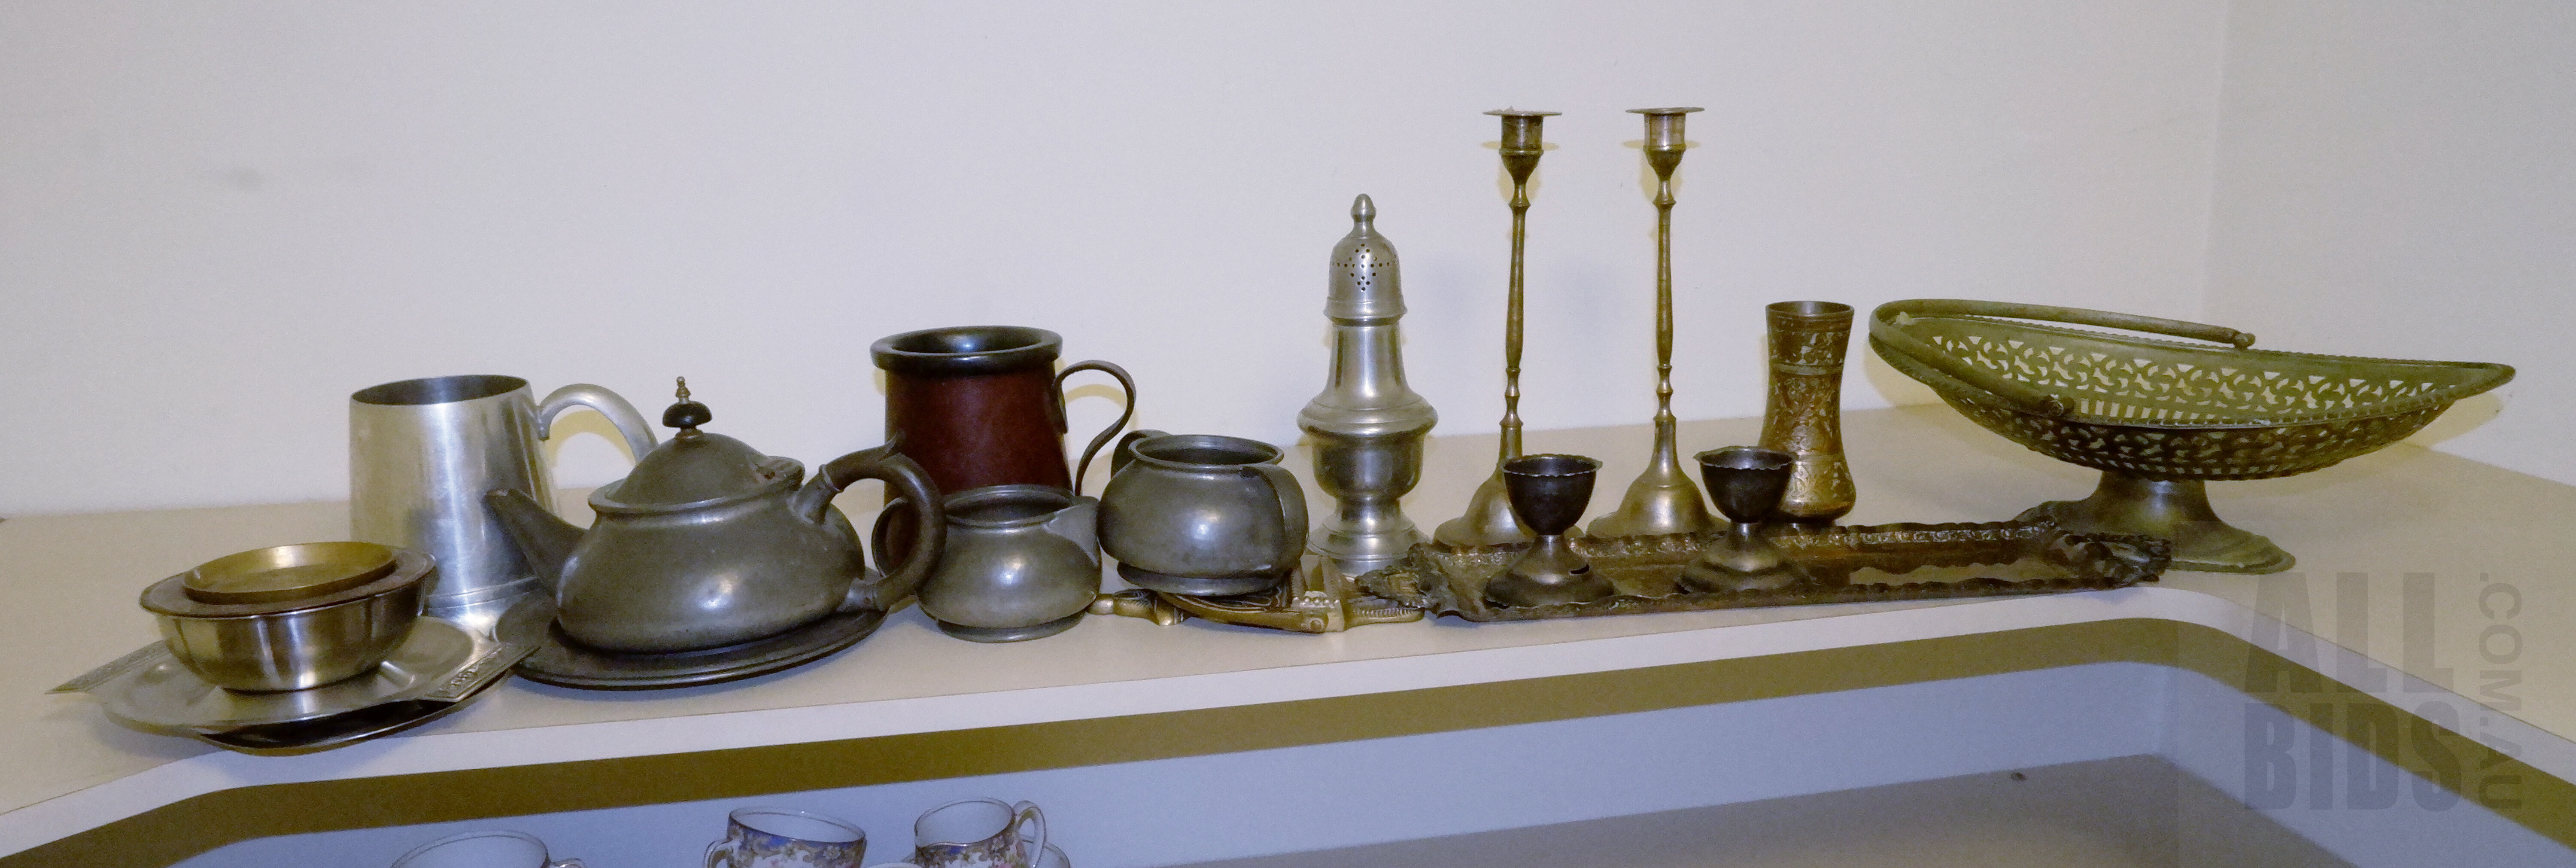 'Collection of Antique and Vintage Silver Plate, Pewter and Brass Ware'